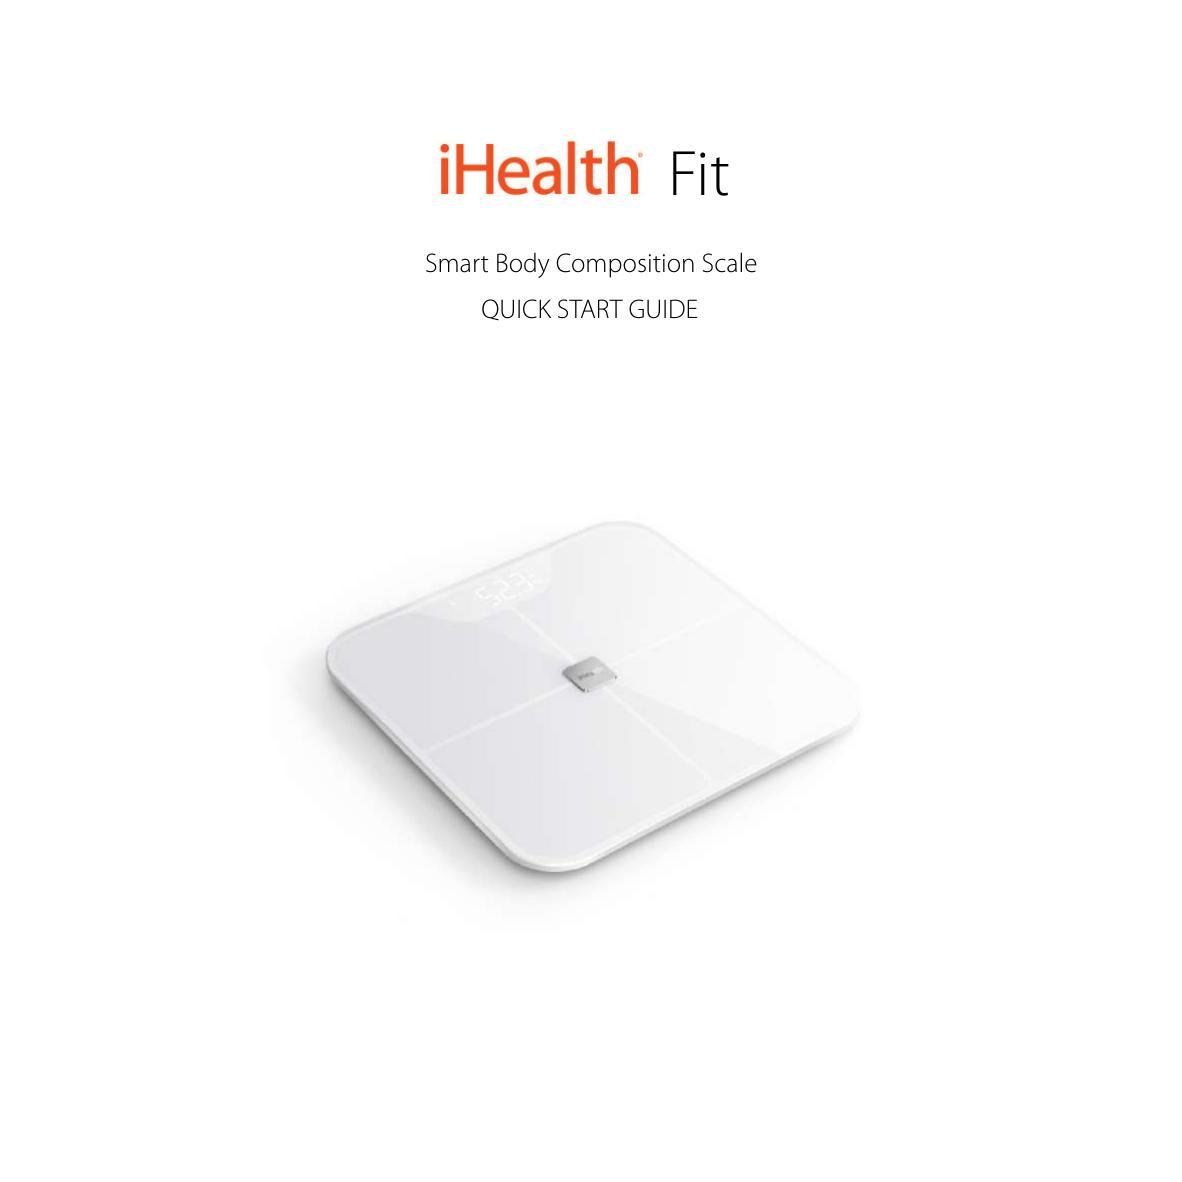 ihealth-fit-smart-body-composition-scale-quick-start-guide.pdf